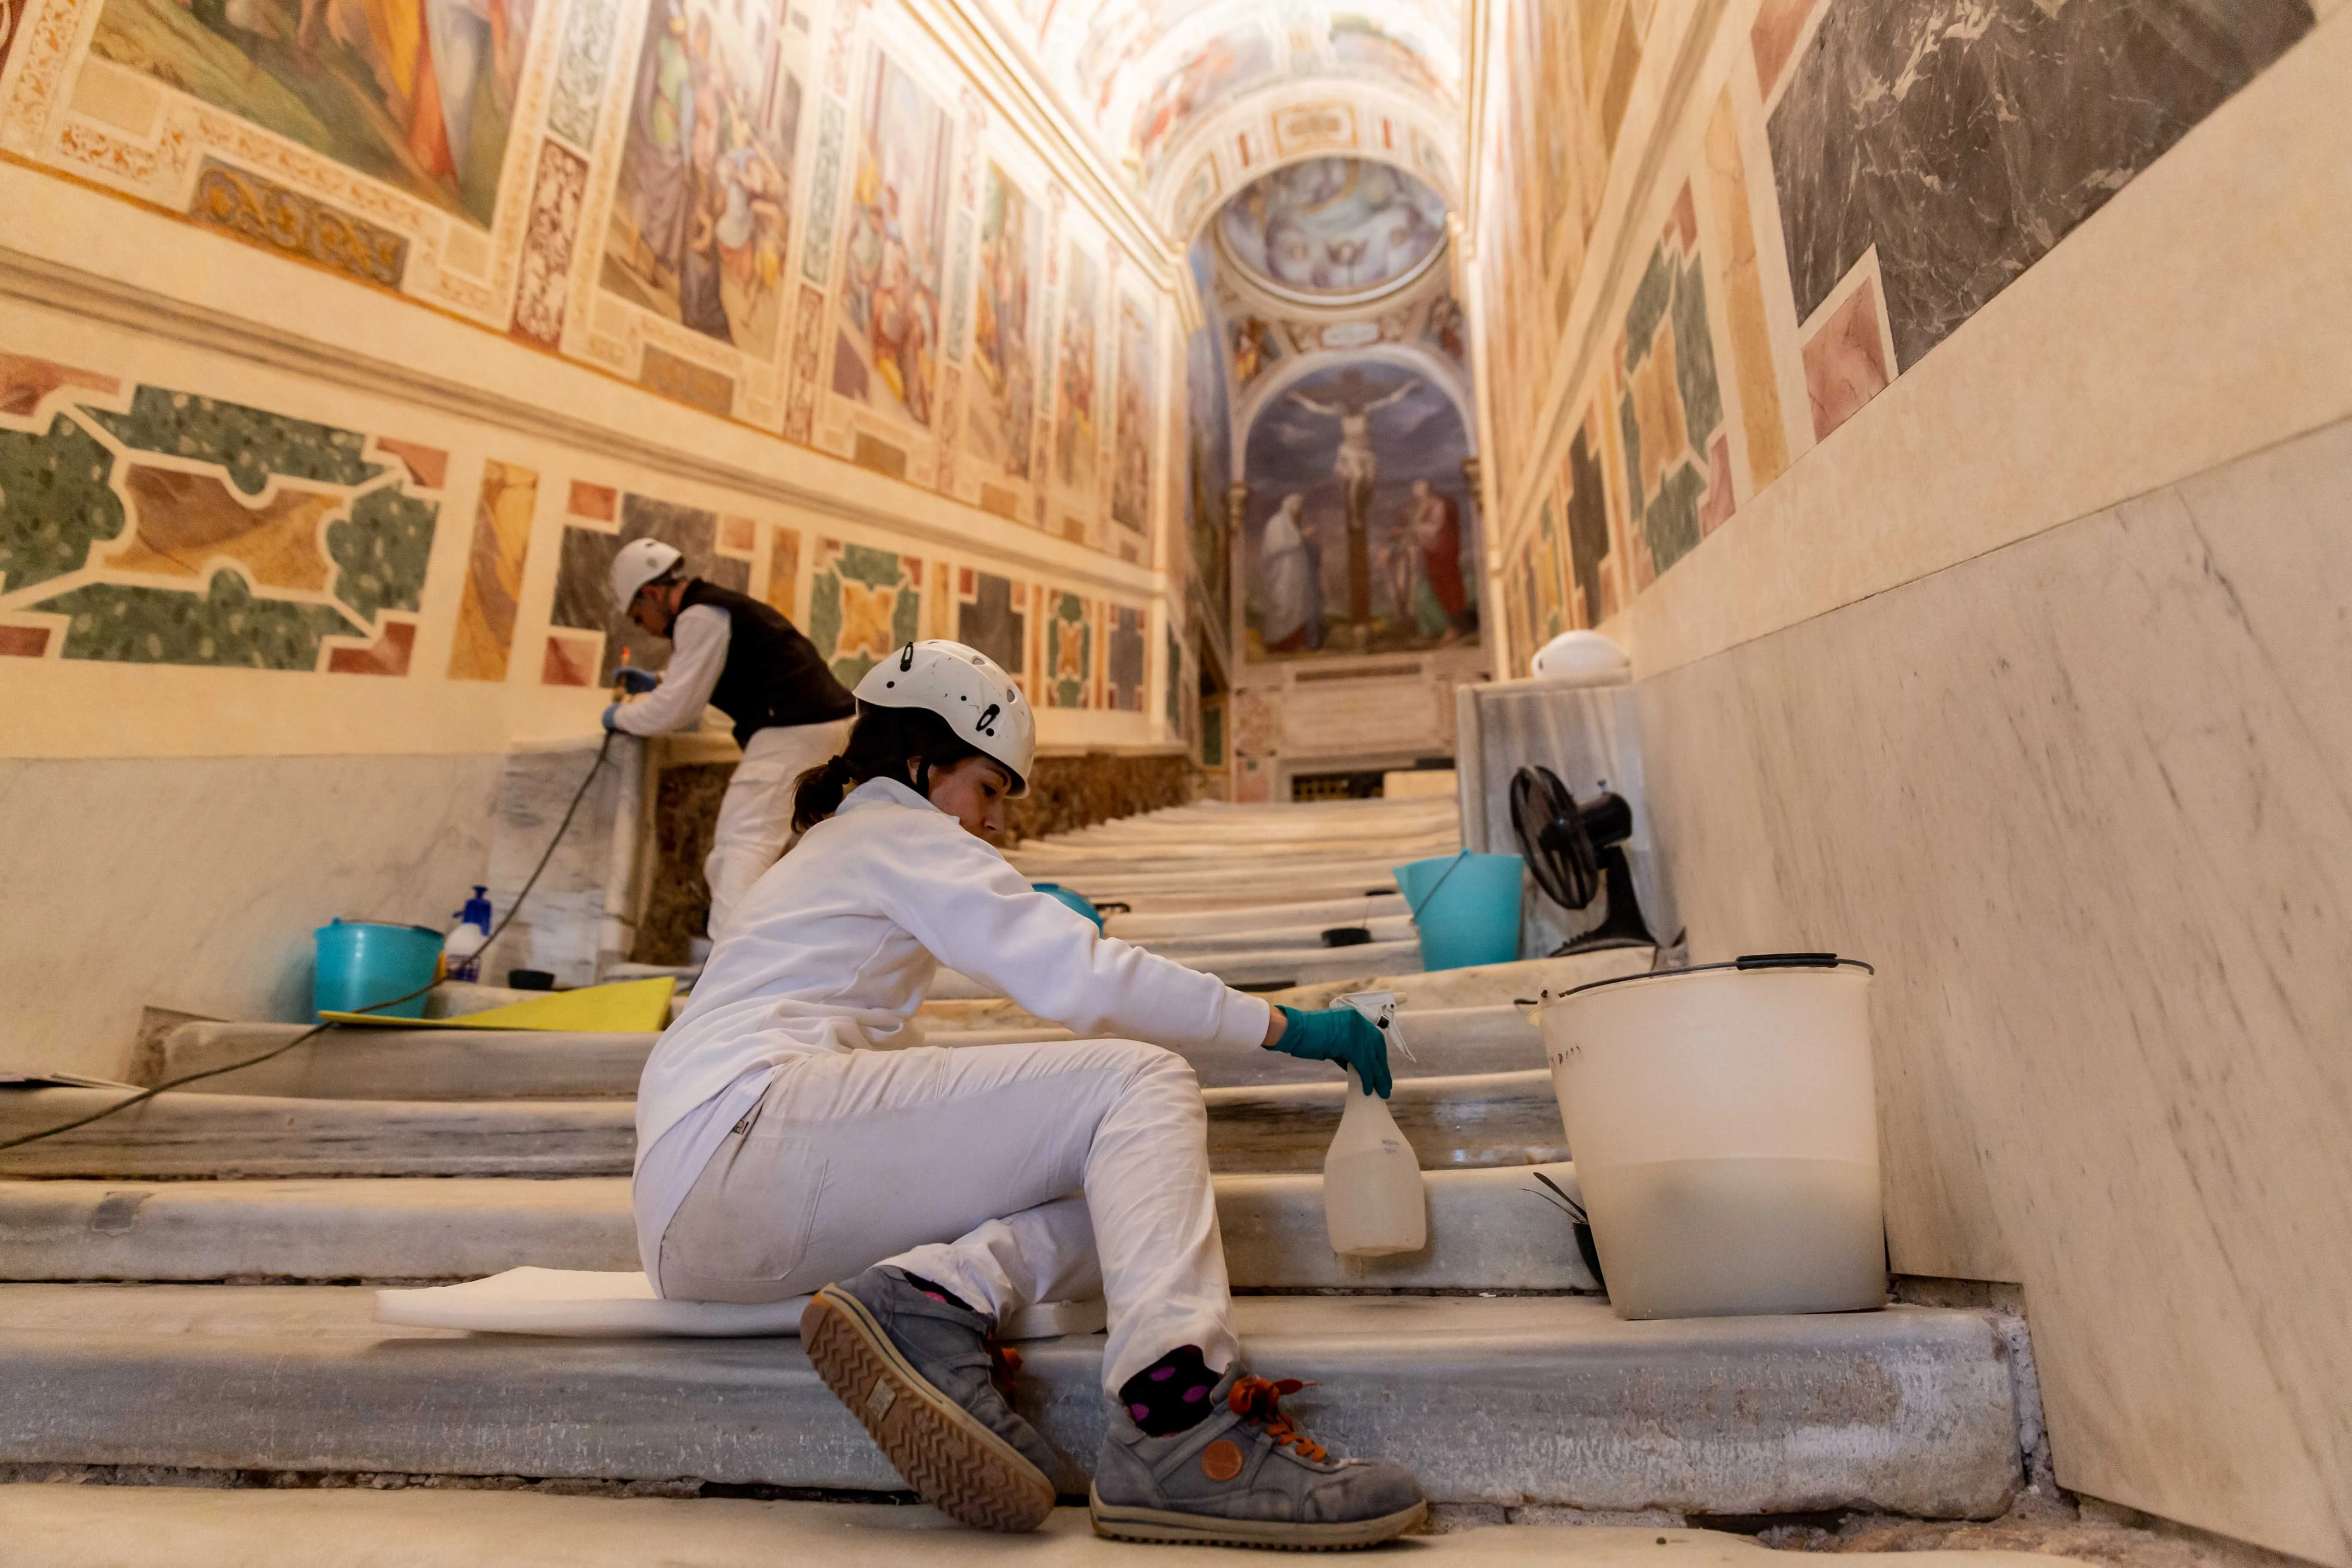 The Holy Stairs in 2019. The marble was uncovered temporarily as part of a restoration project. Daniel Ibanez/CNA